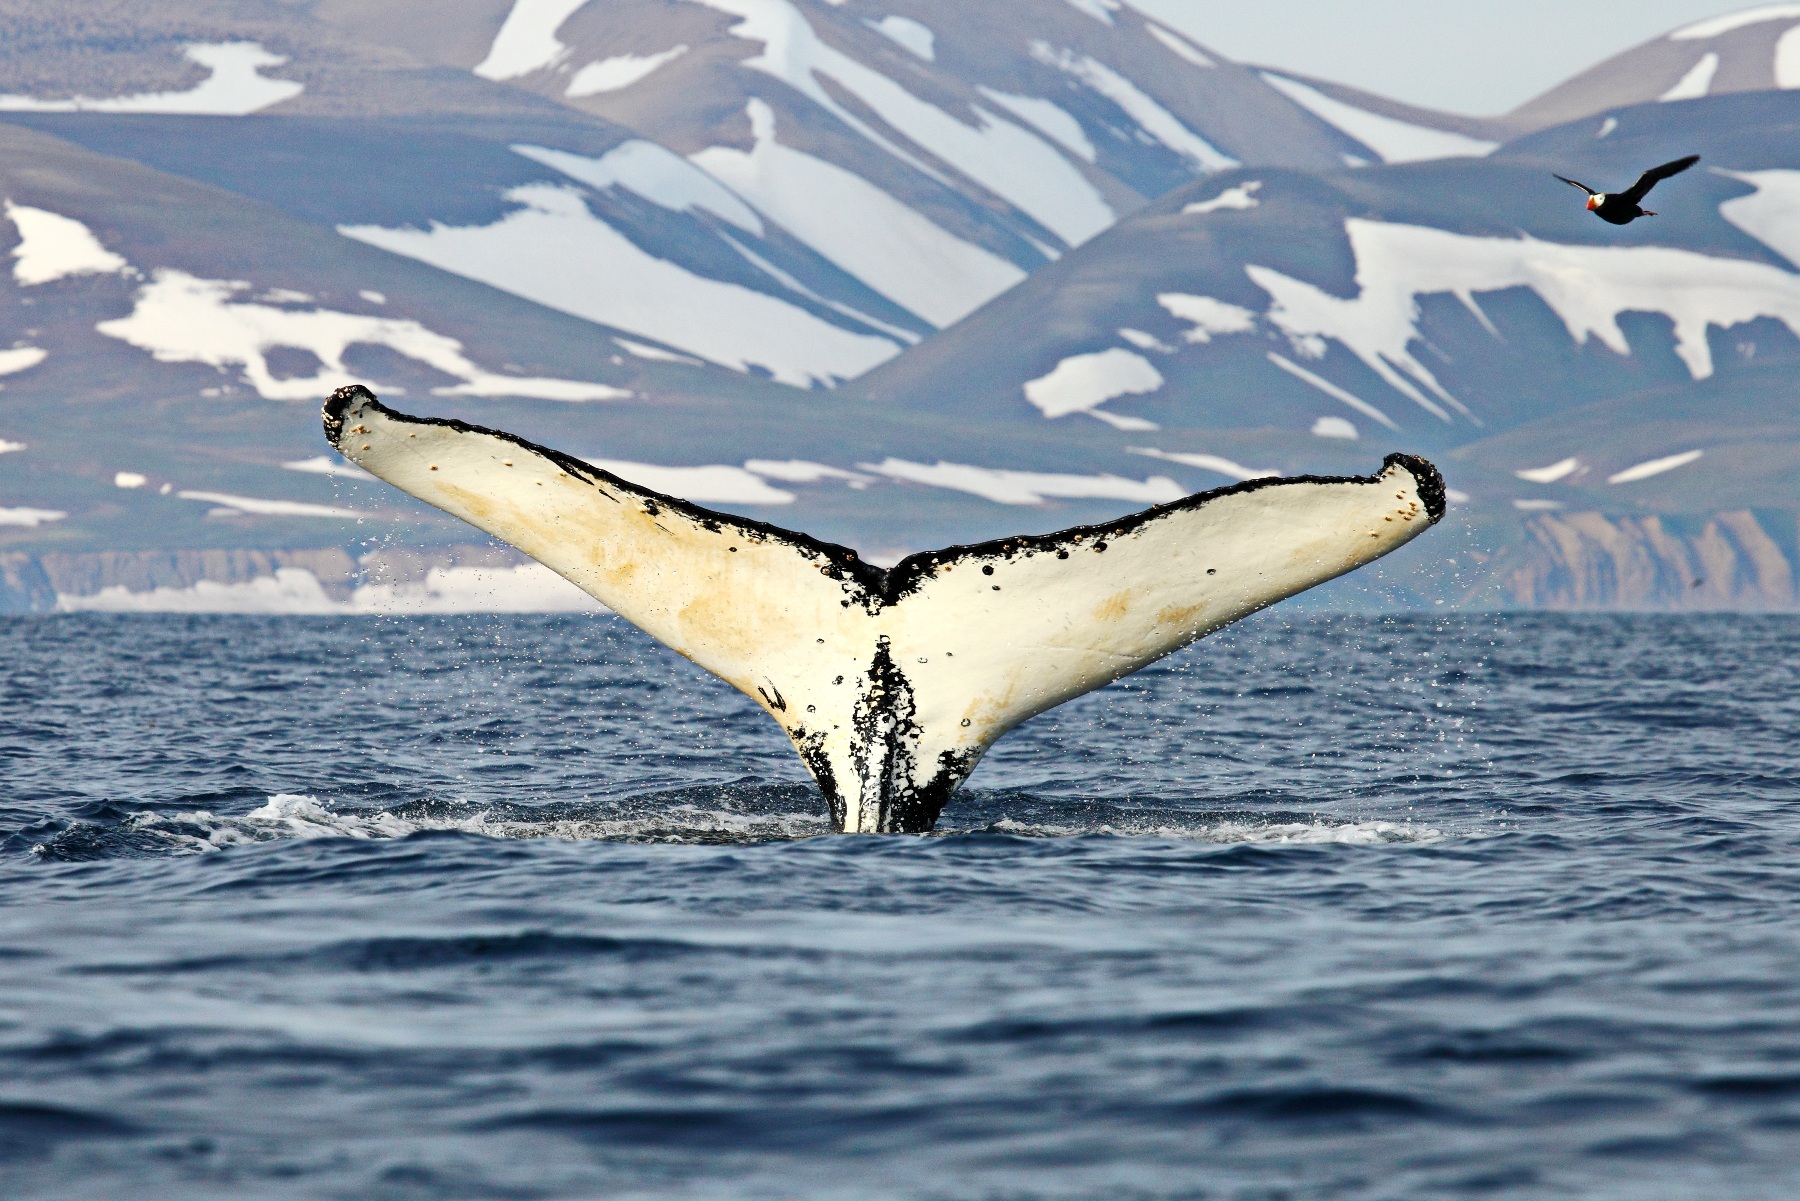 Humpback whale. Photo by Evgeny Mamaev